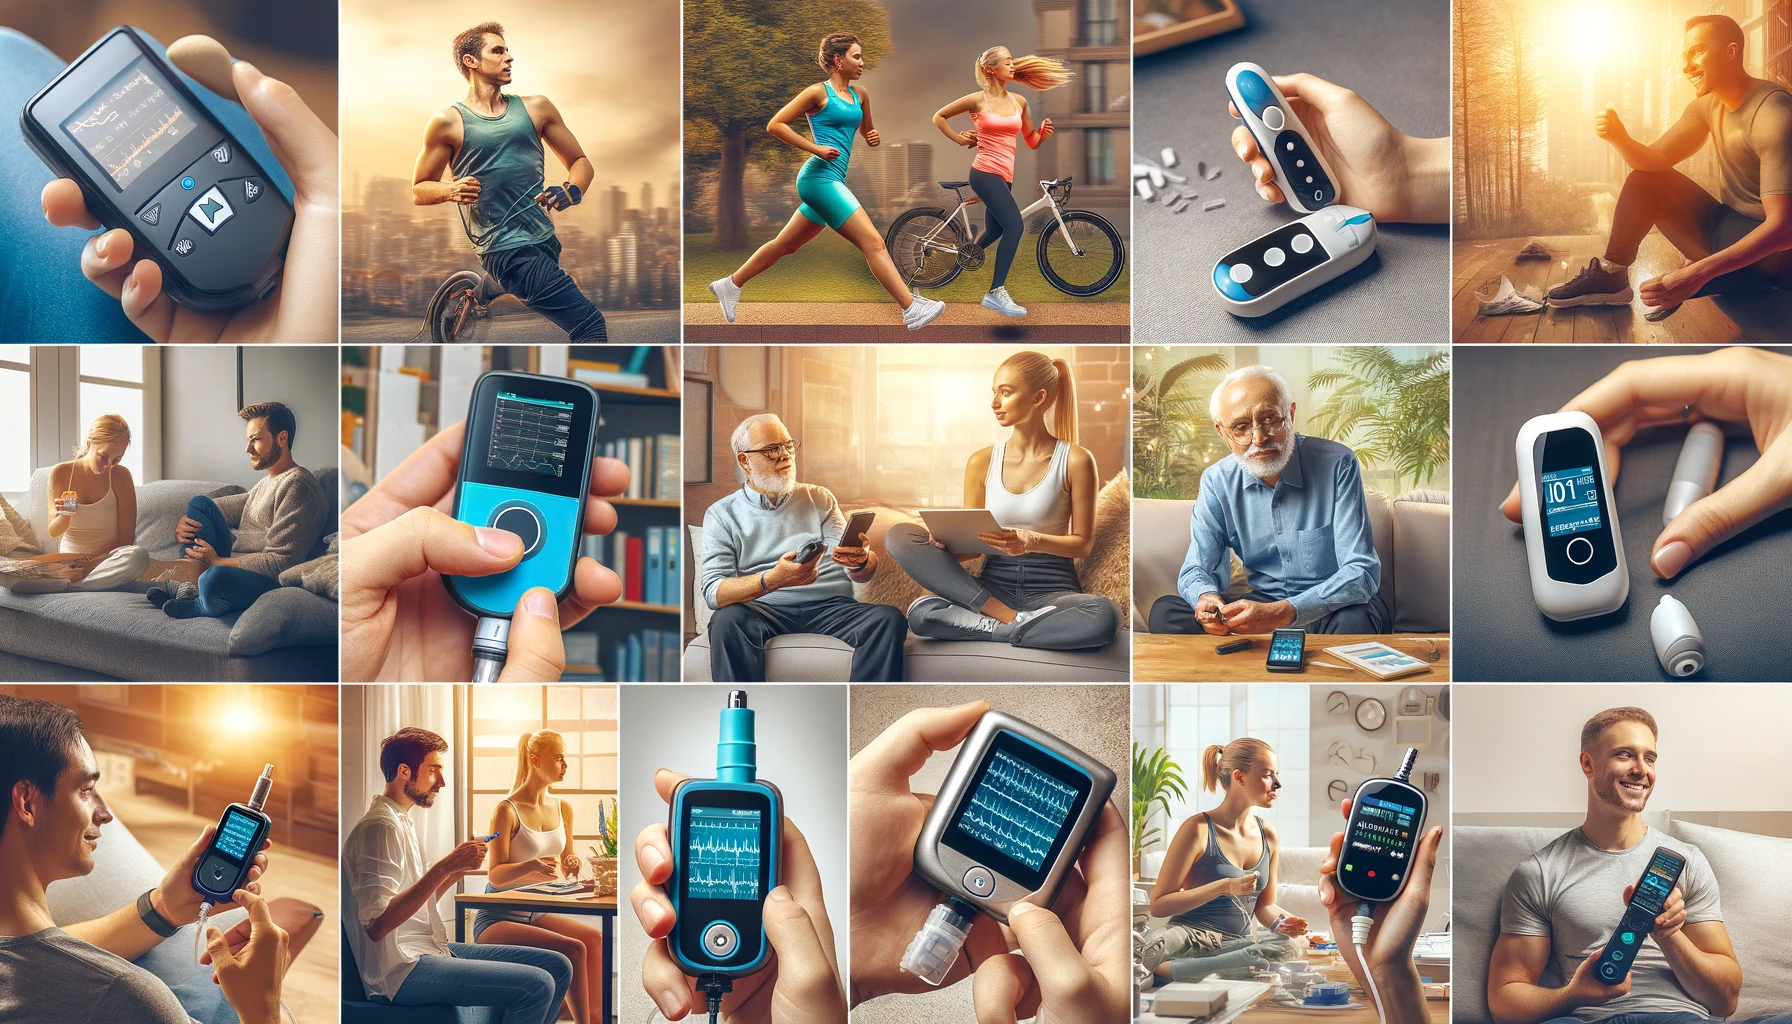 Diverse Individuals Seamlessly Integrating Insulin Pumps into Their Daily Activities